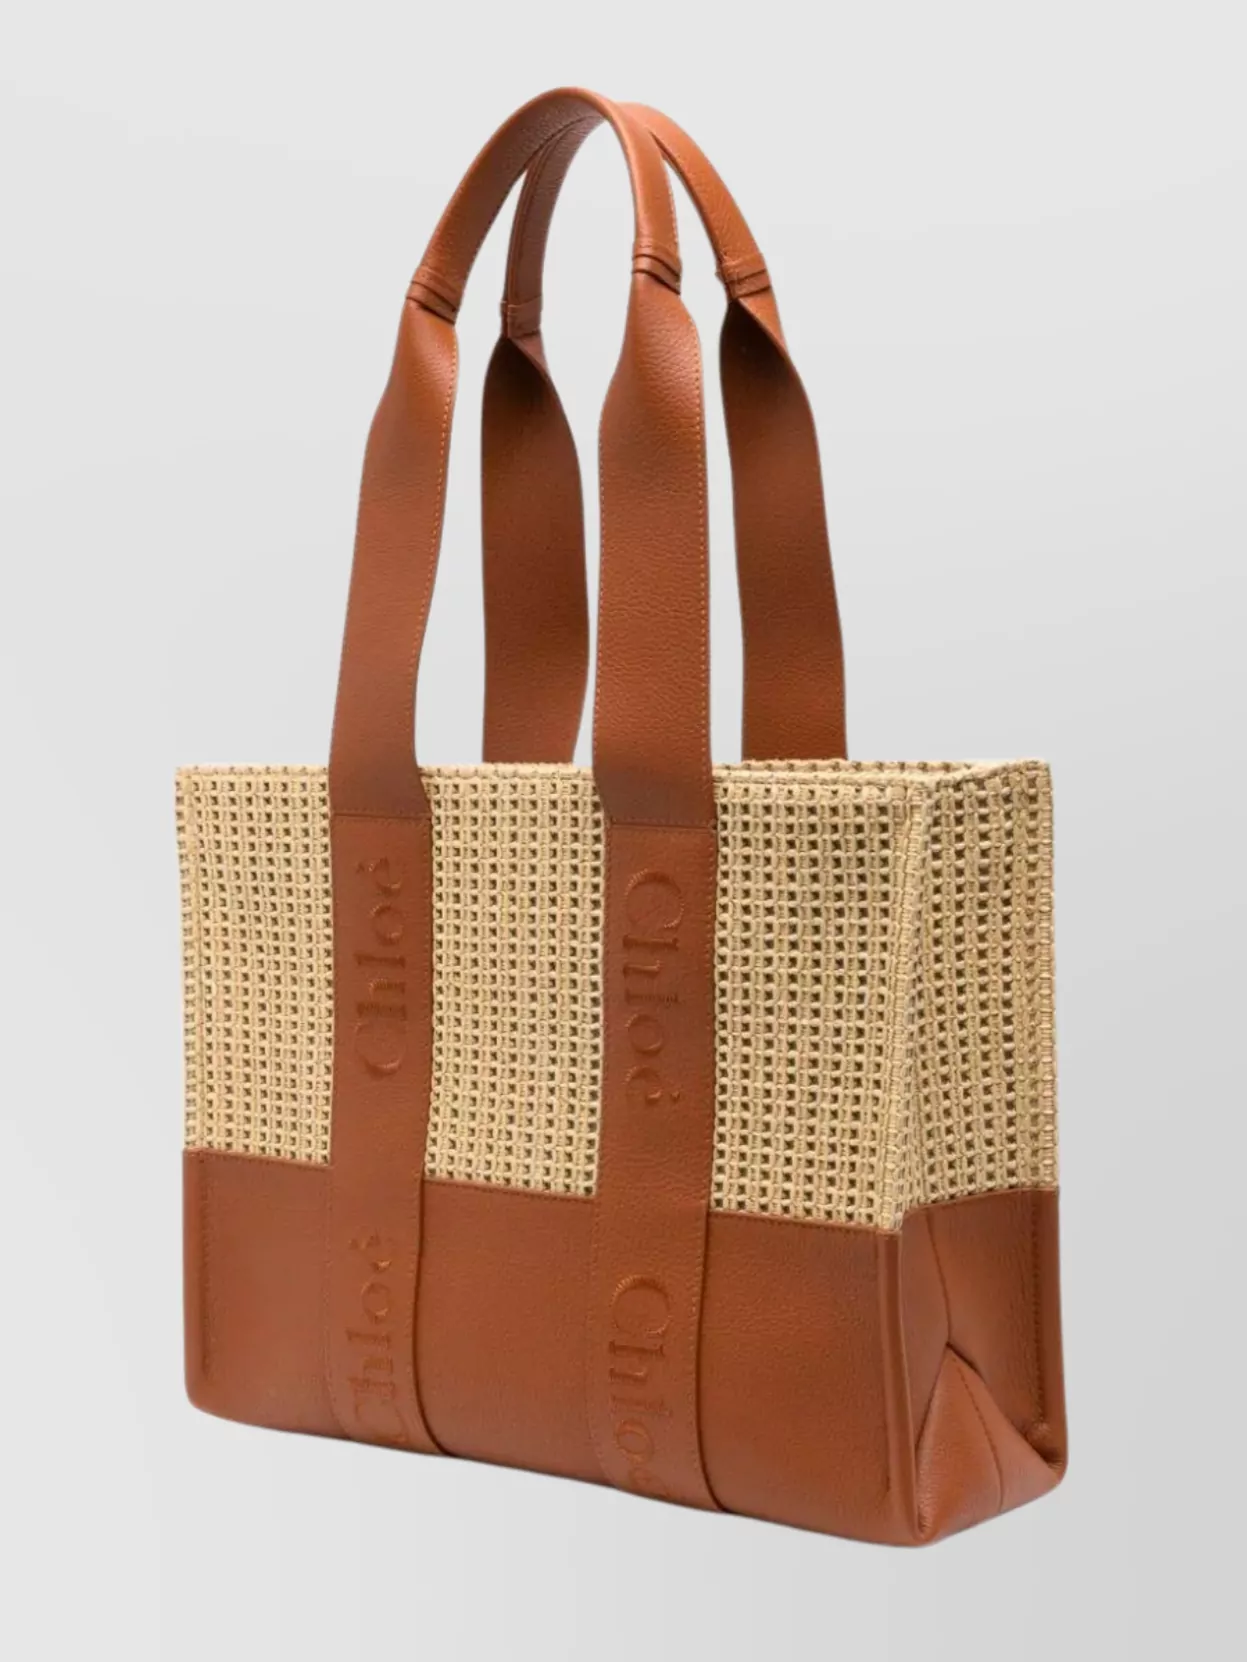 Chloé Medium Tote Bag Featuring Woven Detailing In Brown